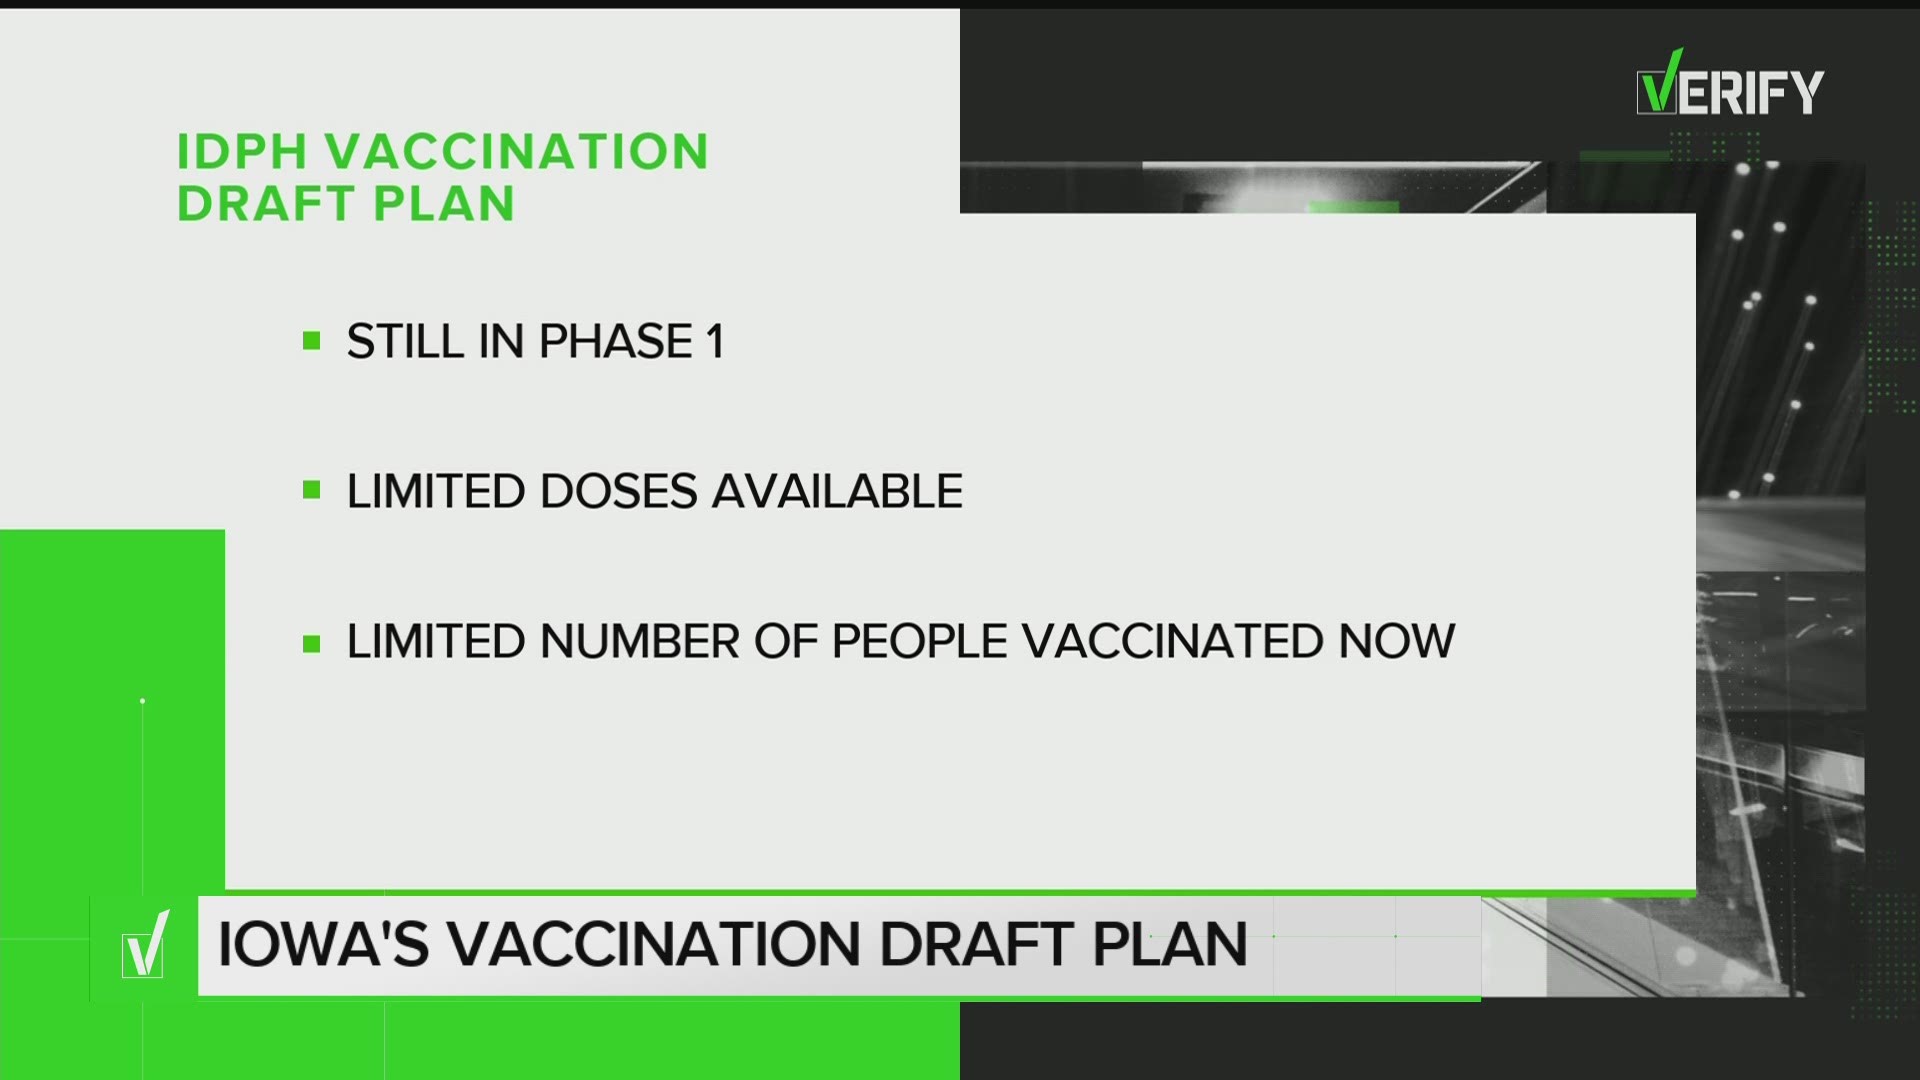 The White House and CDC left it up to states to decide how to distribute the vaccine, so each plan will be different.